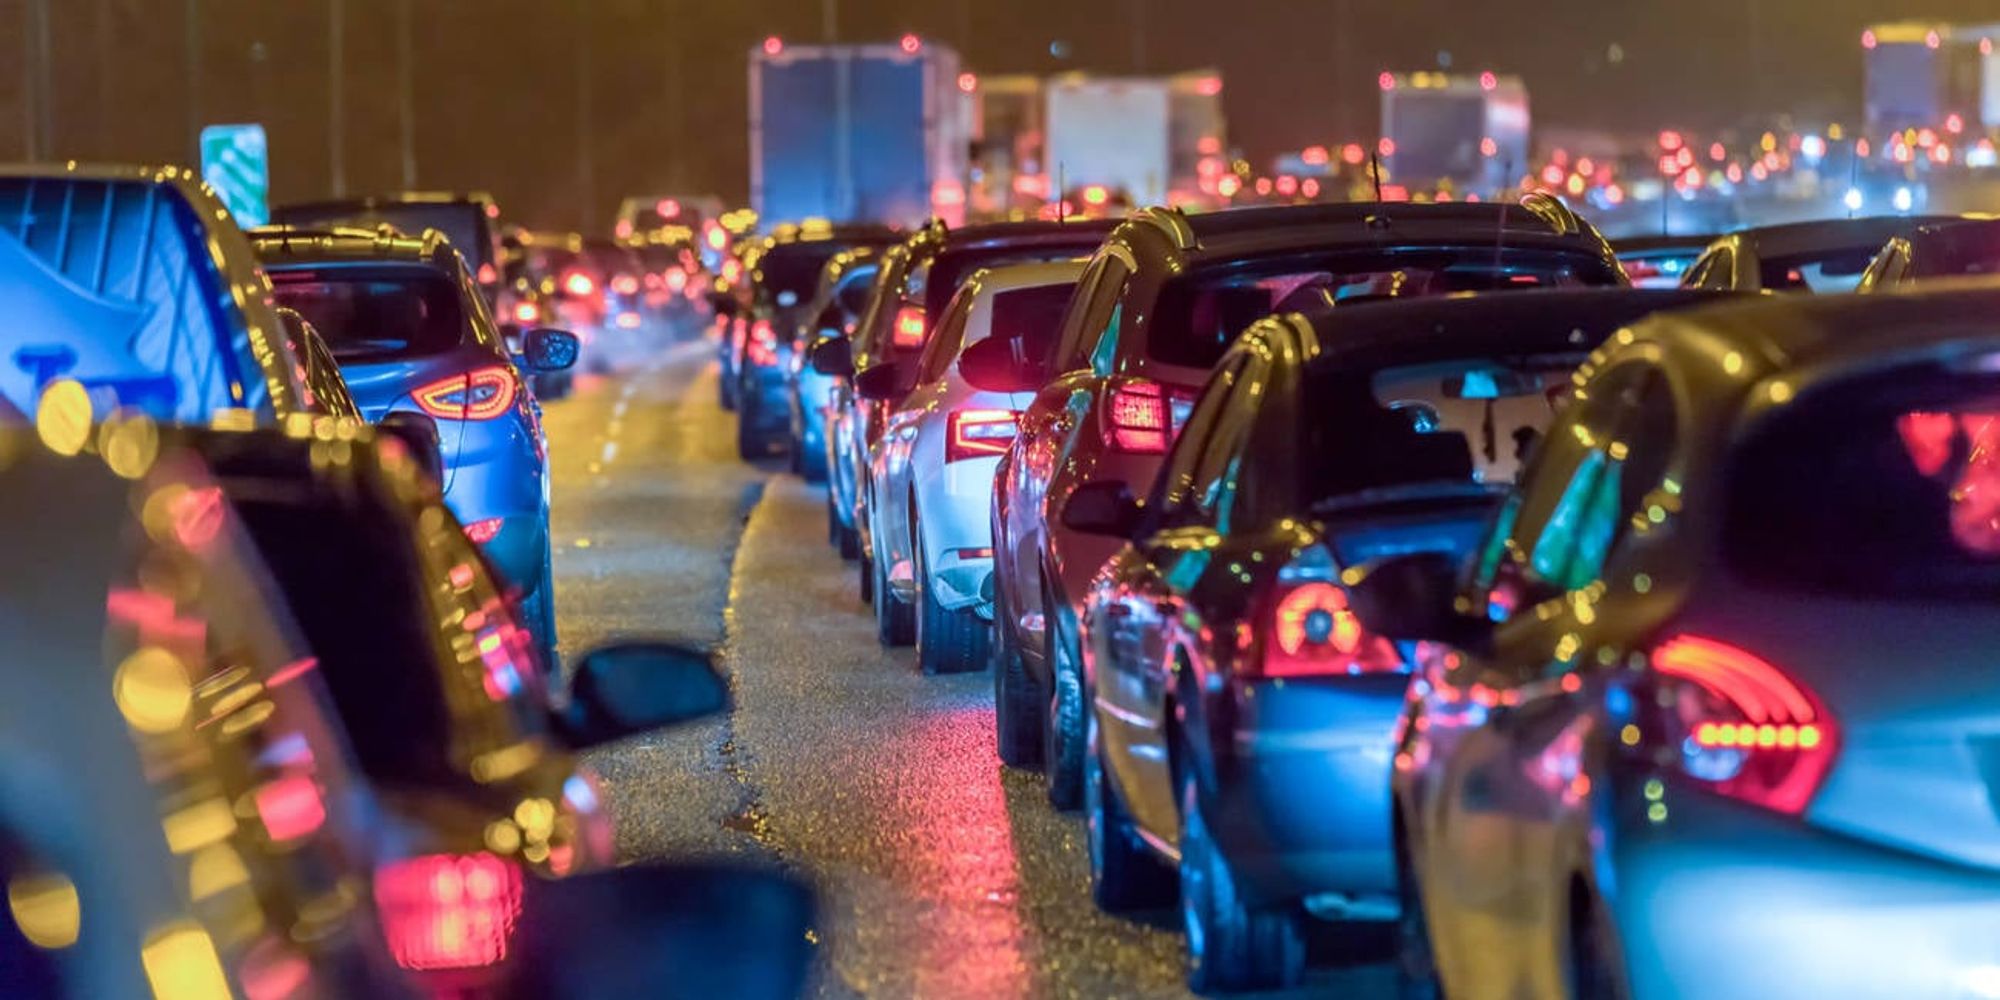 Study suggests AI cruise control could smooth commutes • The Register